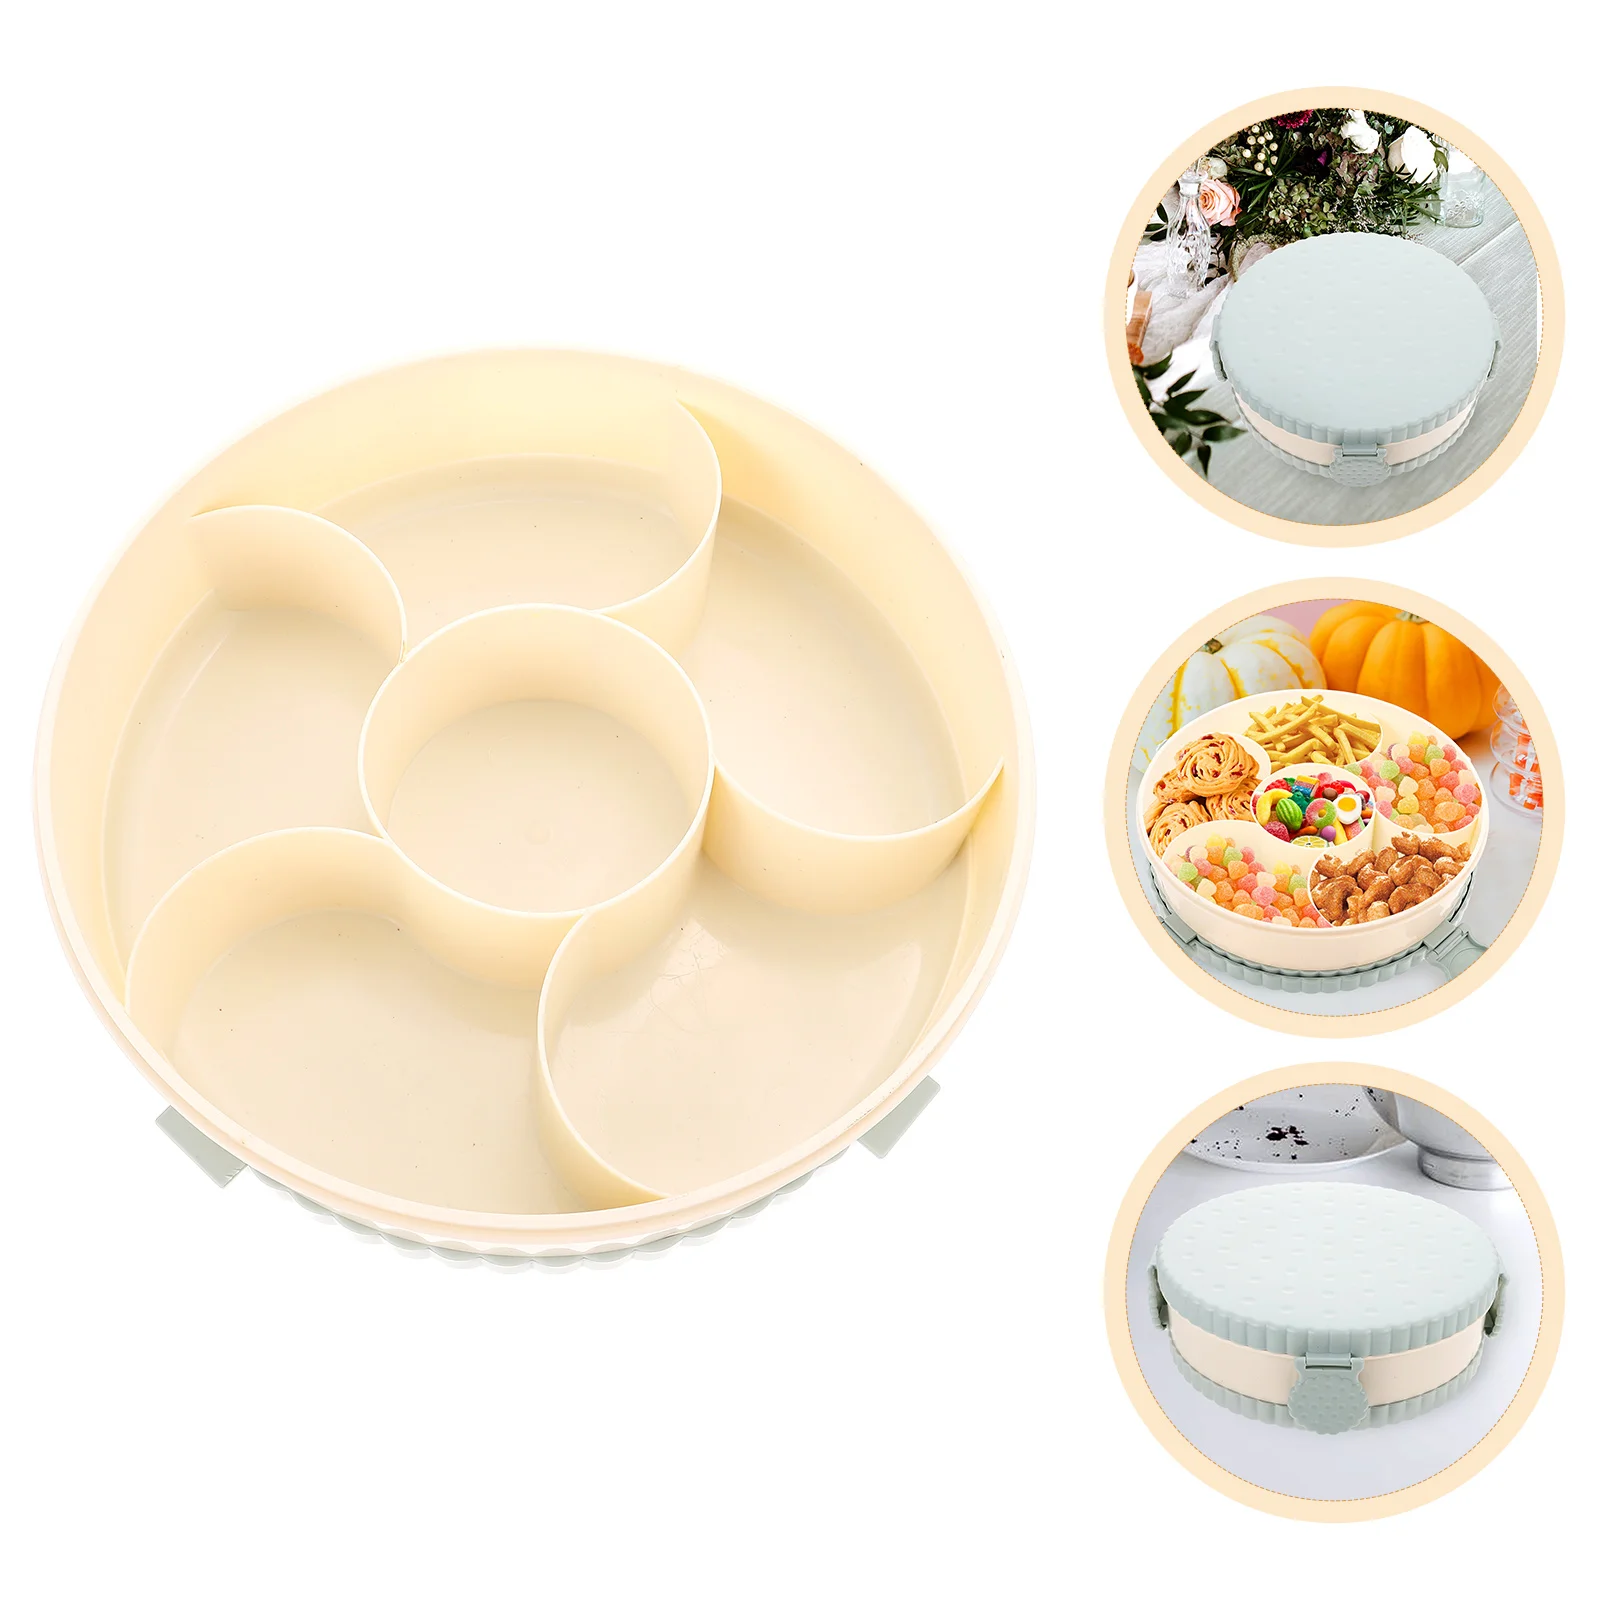 Serving Dish Snack Divided Platter Bowl Bowls Chip Box Containers Appetizer Plate Sauce Fruit Saucer Tray Nut Plates Dessert